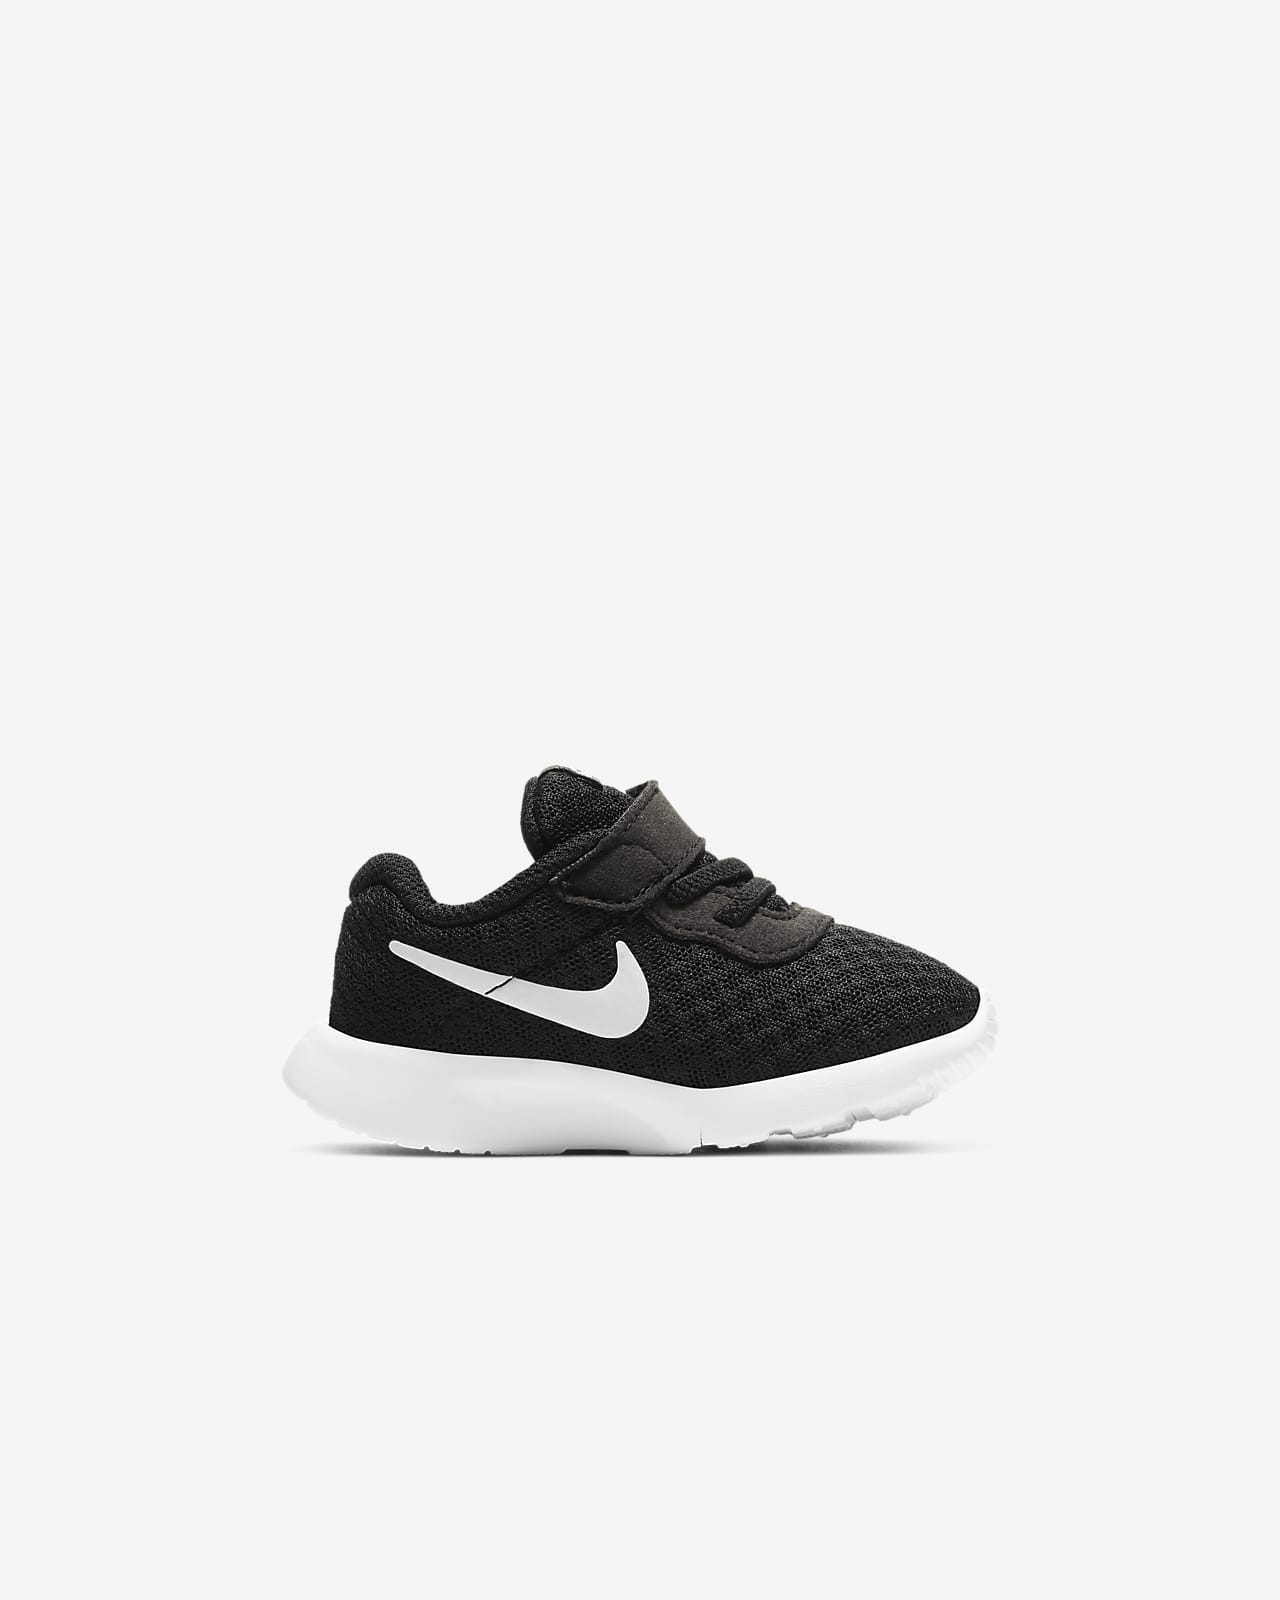 nike shoes for toddlers